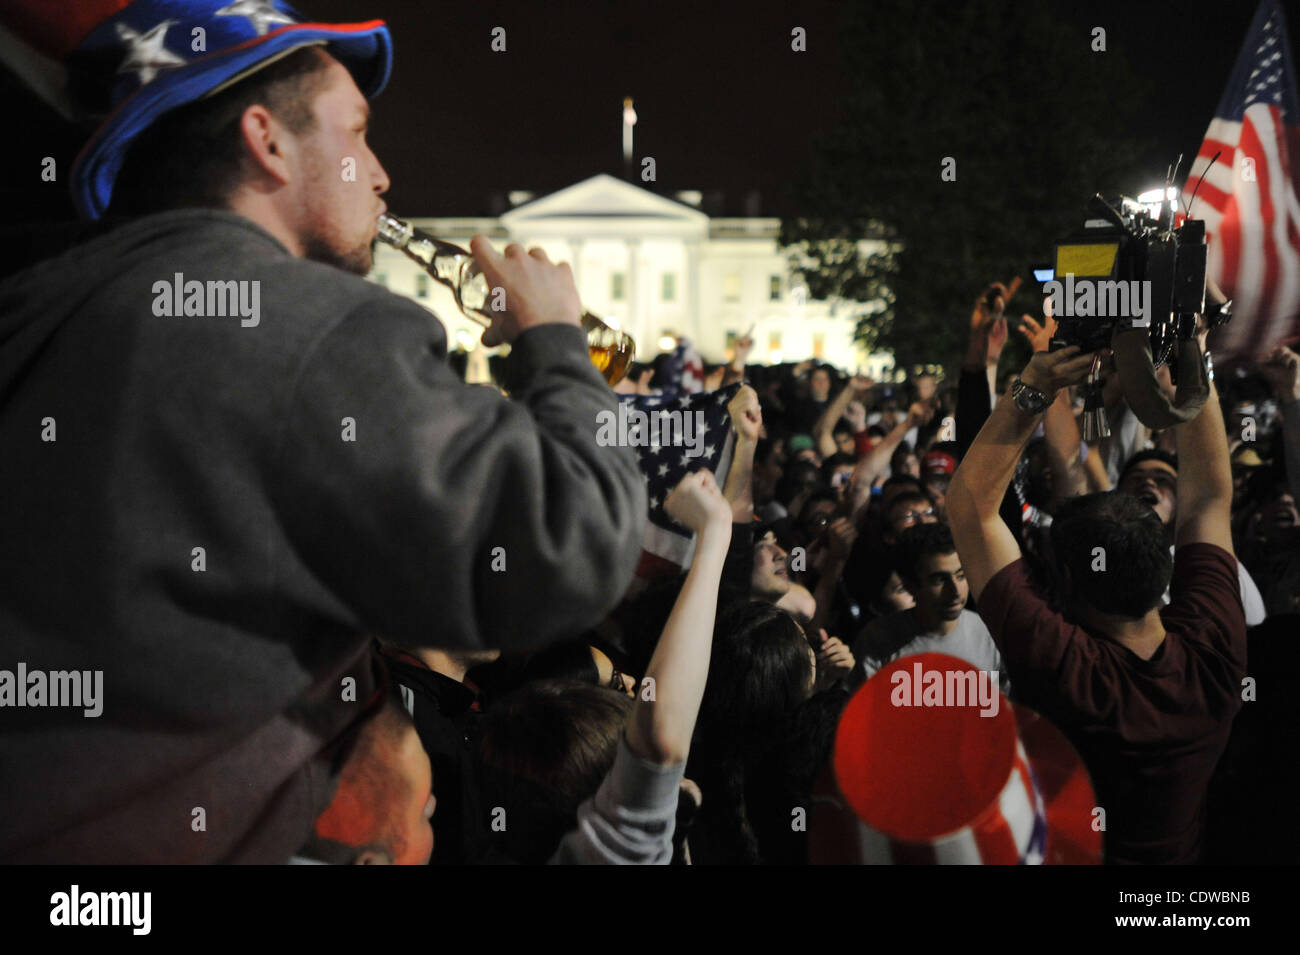 May 2, 2011 - Washington, District of Columbia, U.S. - The American stars and strips was being waved and worn by many of the thousands who gathered at the White House in celebration after U.S. President Barack Obama announced the death of Al-Qaeda front man Osama bin Laden. (Credit Image: © Vaughn W Stock Photo